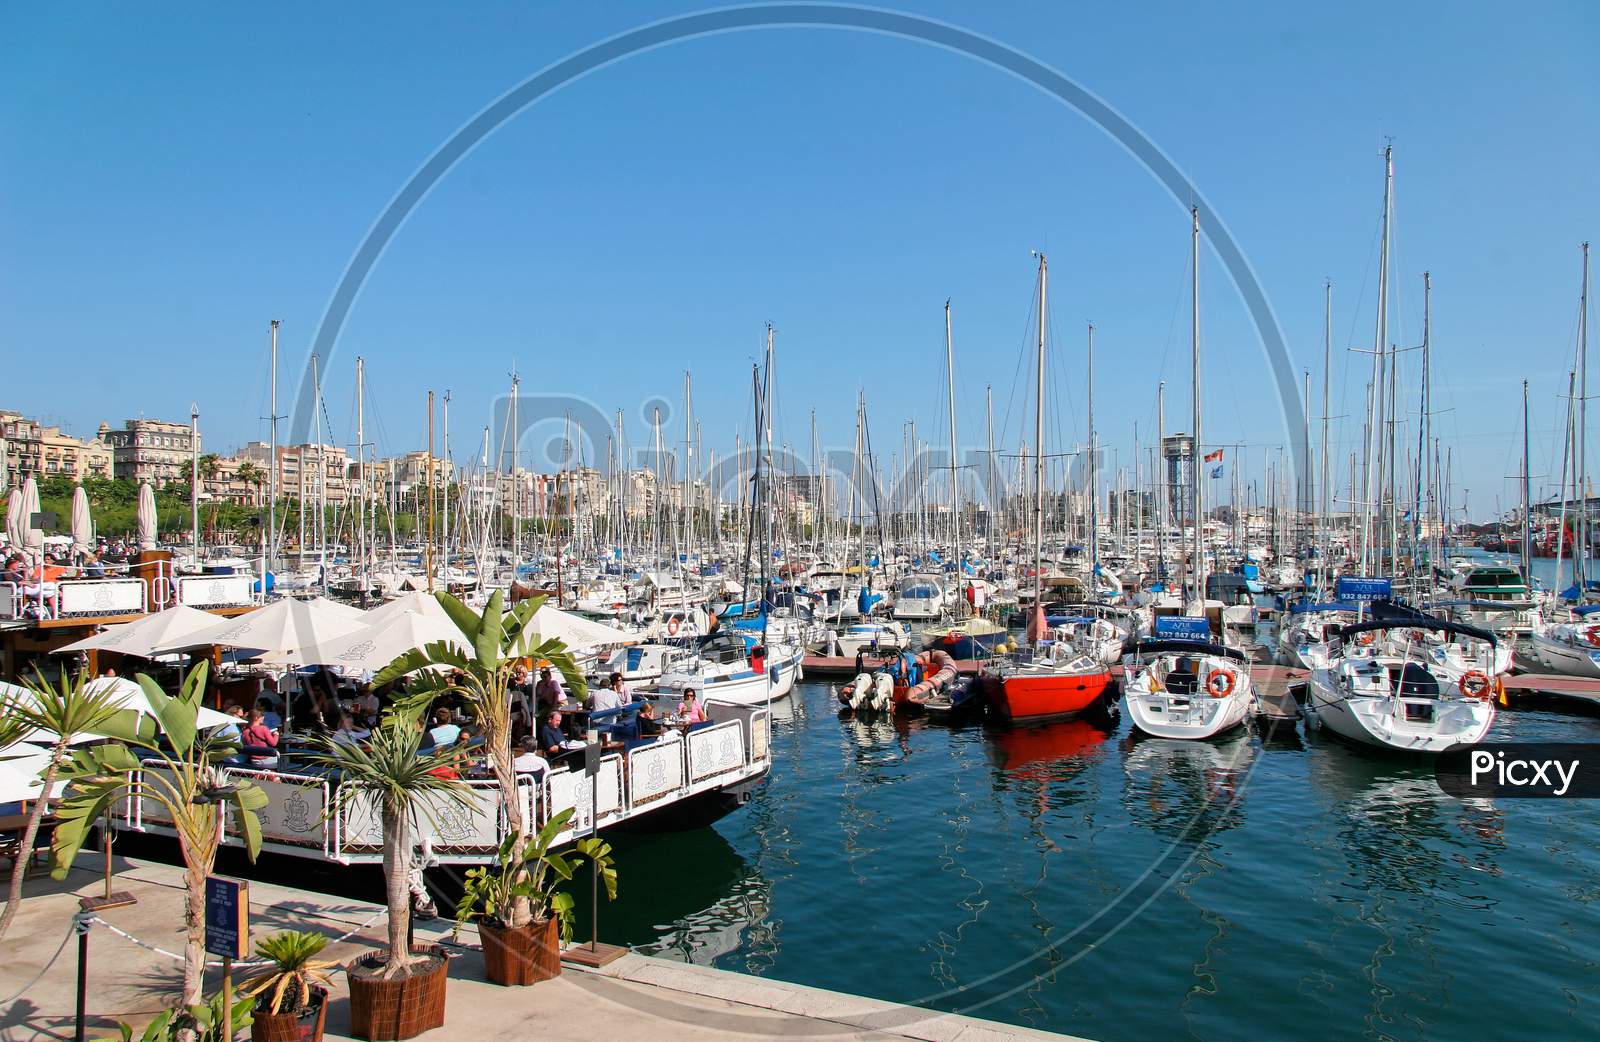 Assortment Of Boats And Yachts Moored At The Marina In Barcelona